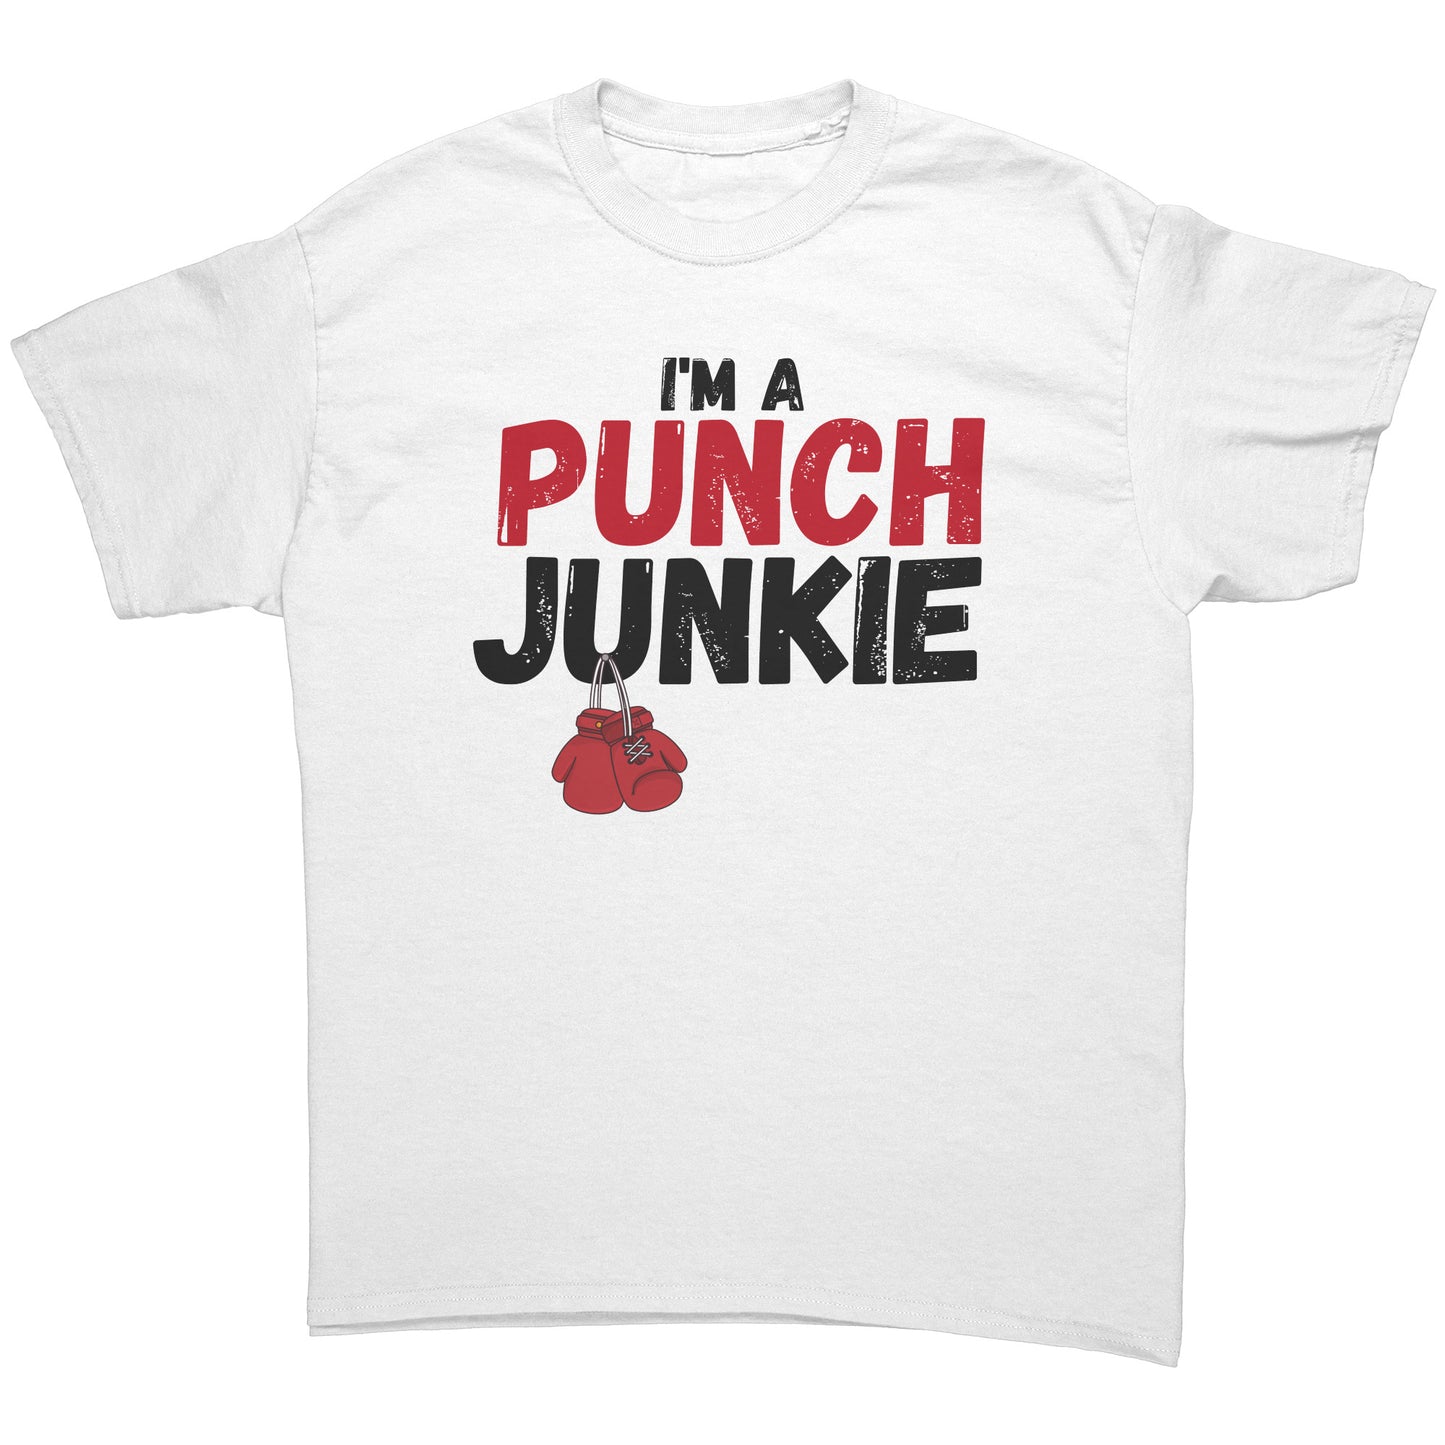 The "I'm a Punch Junkie" Official T-Shirt